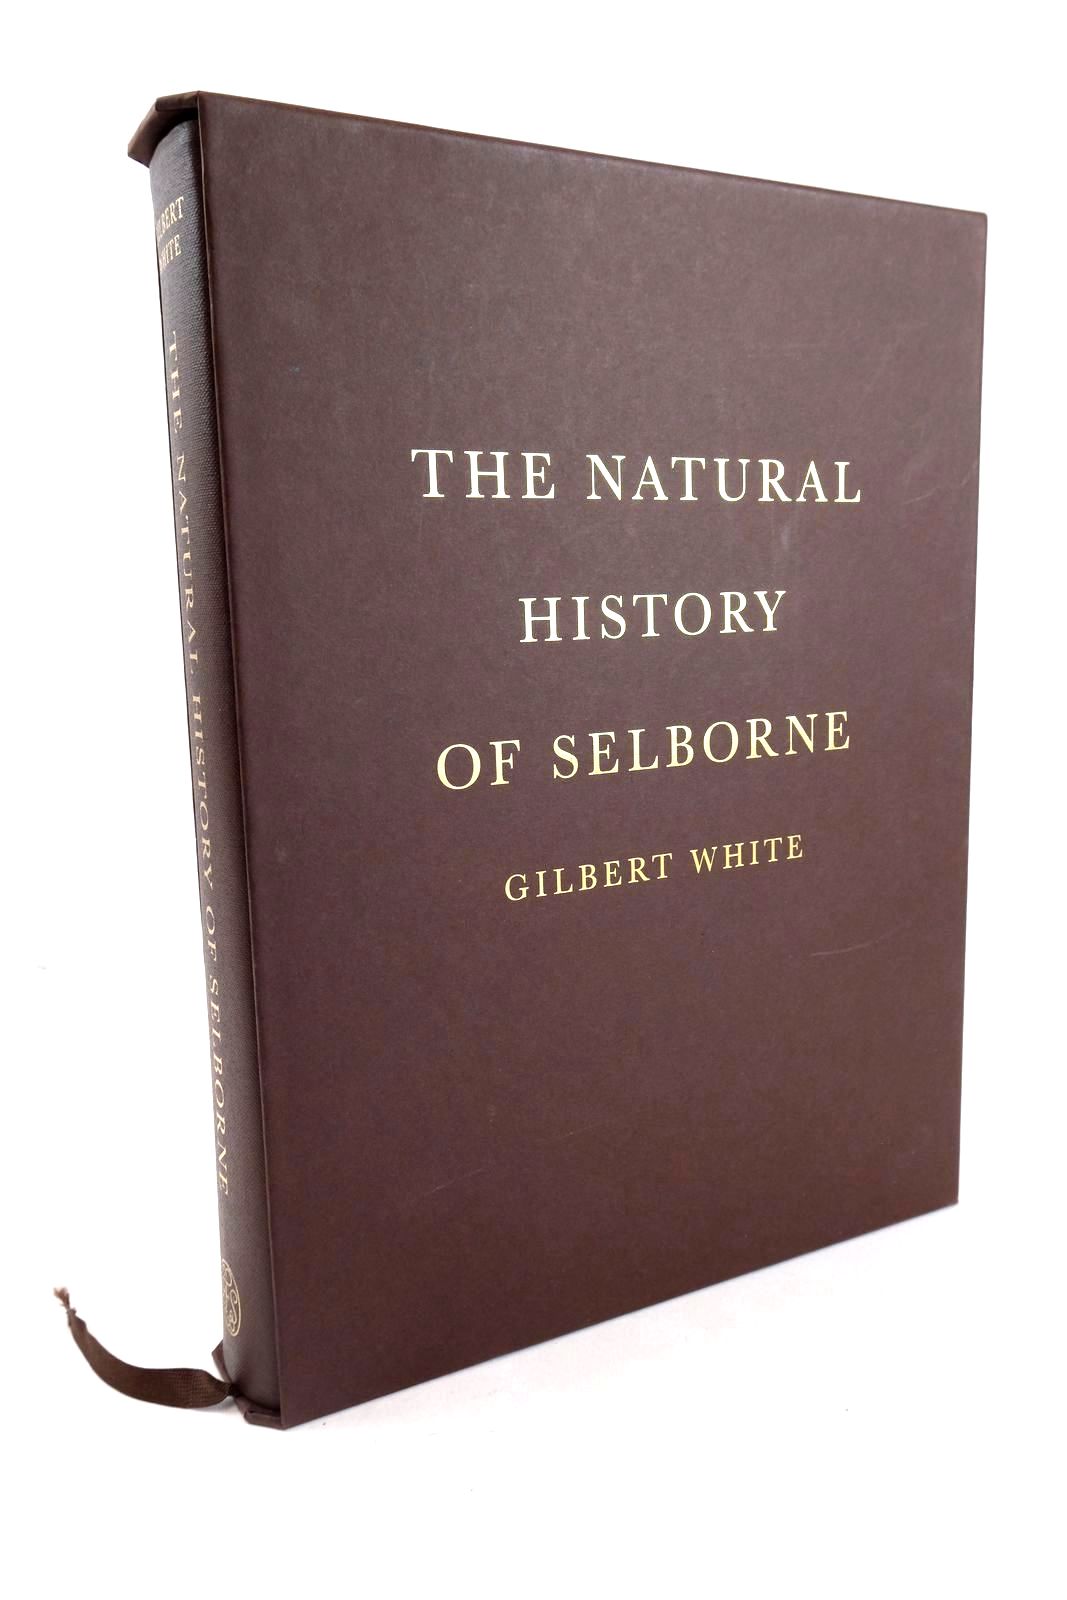 Photo of THE NATURAL HISTORY OF SELBORNE- Stock Number: 1326647